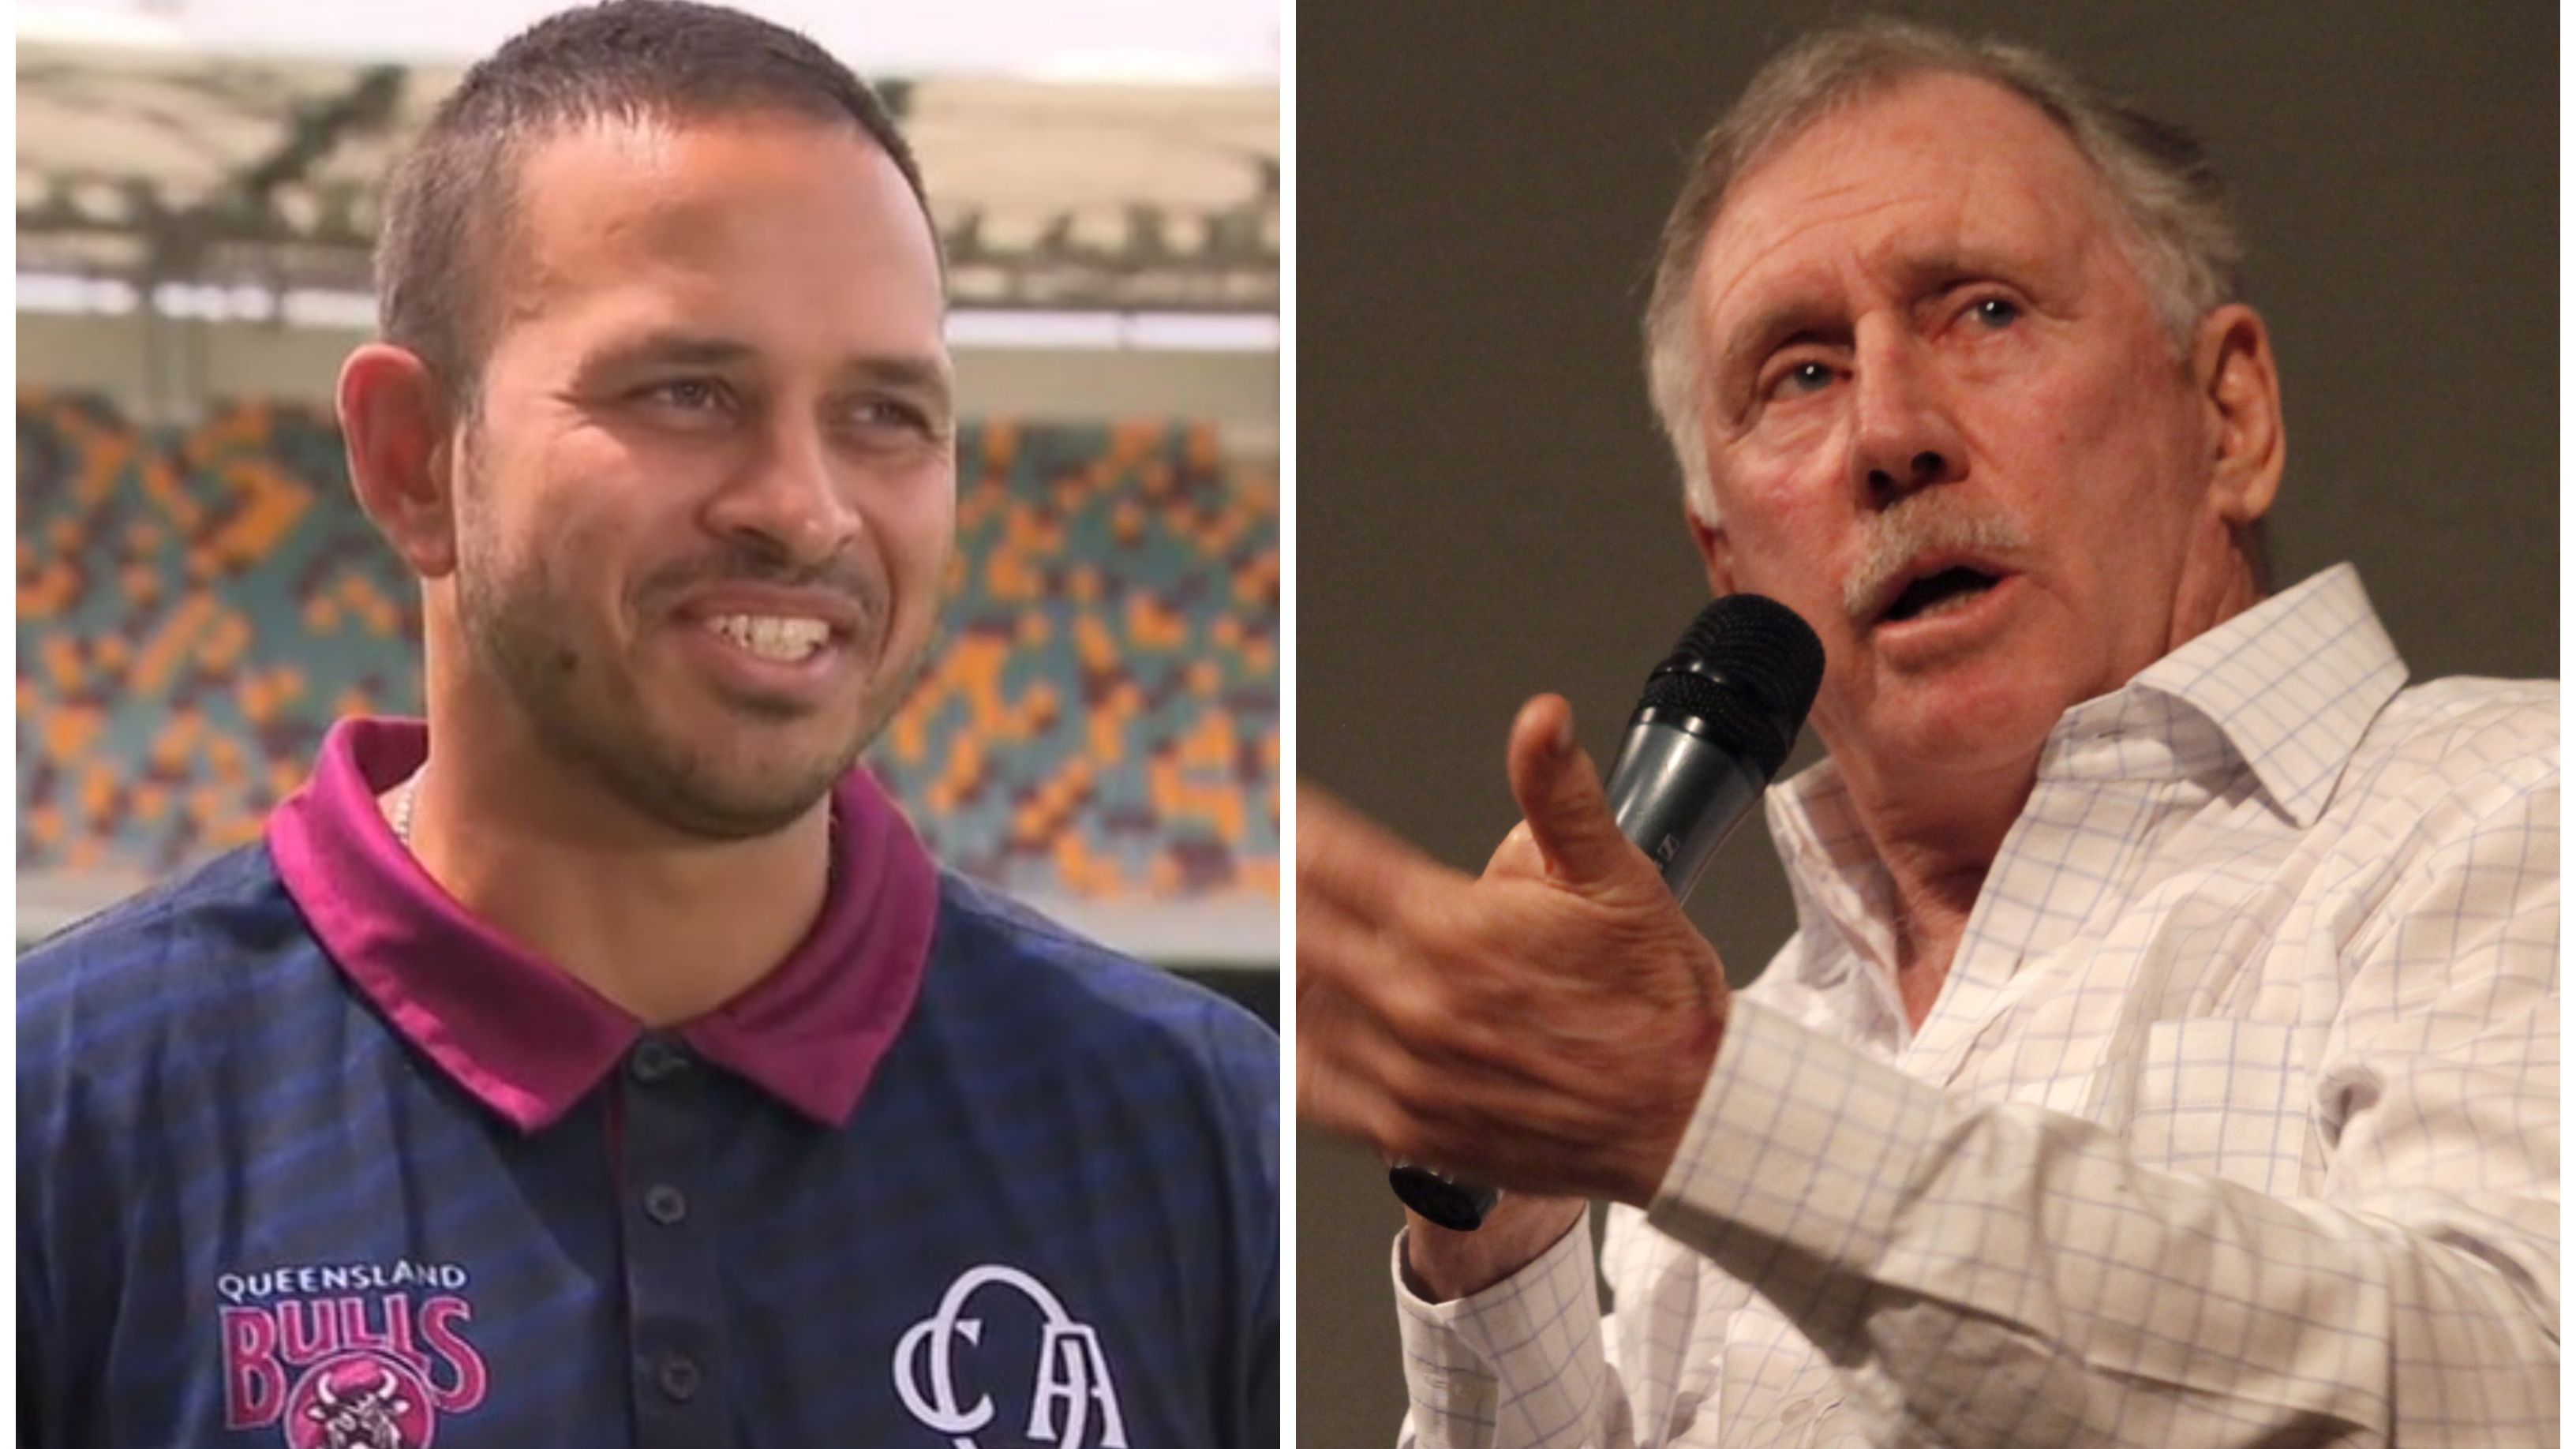 Usman Khawaja takes cheeky dig at Ian Chappell after legend's stinging put-down